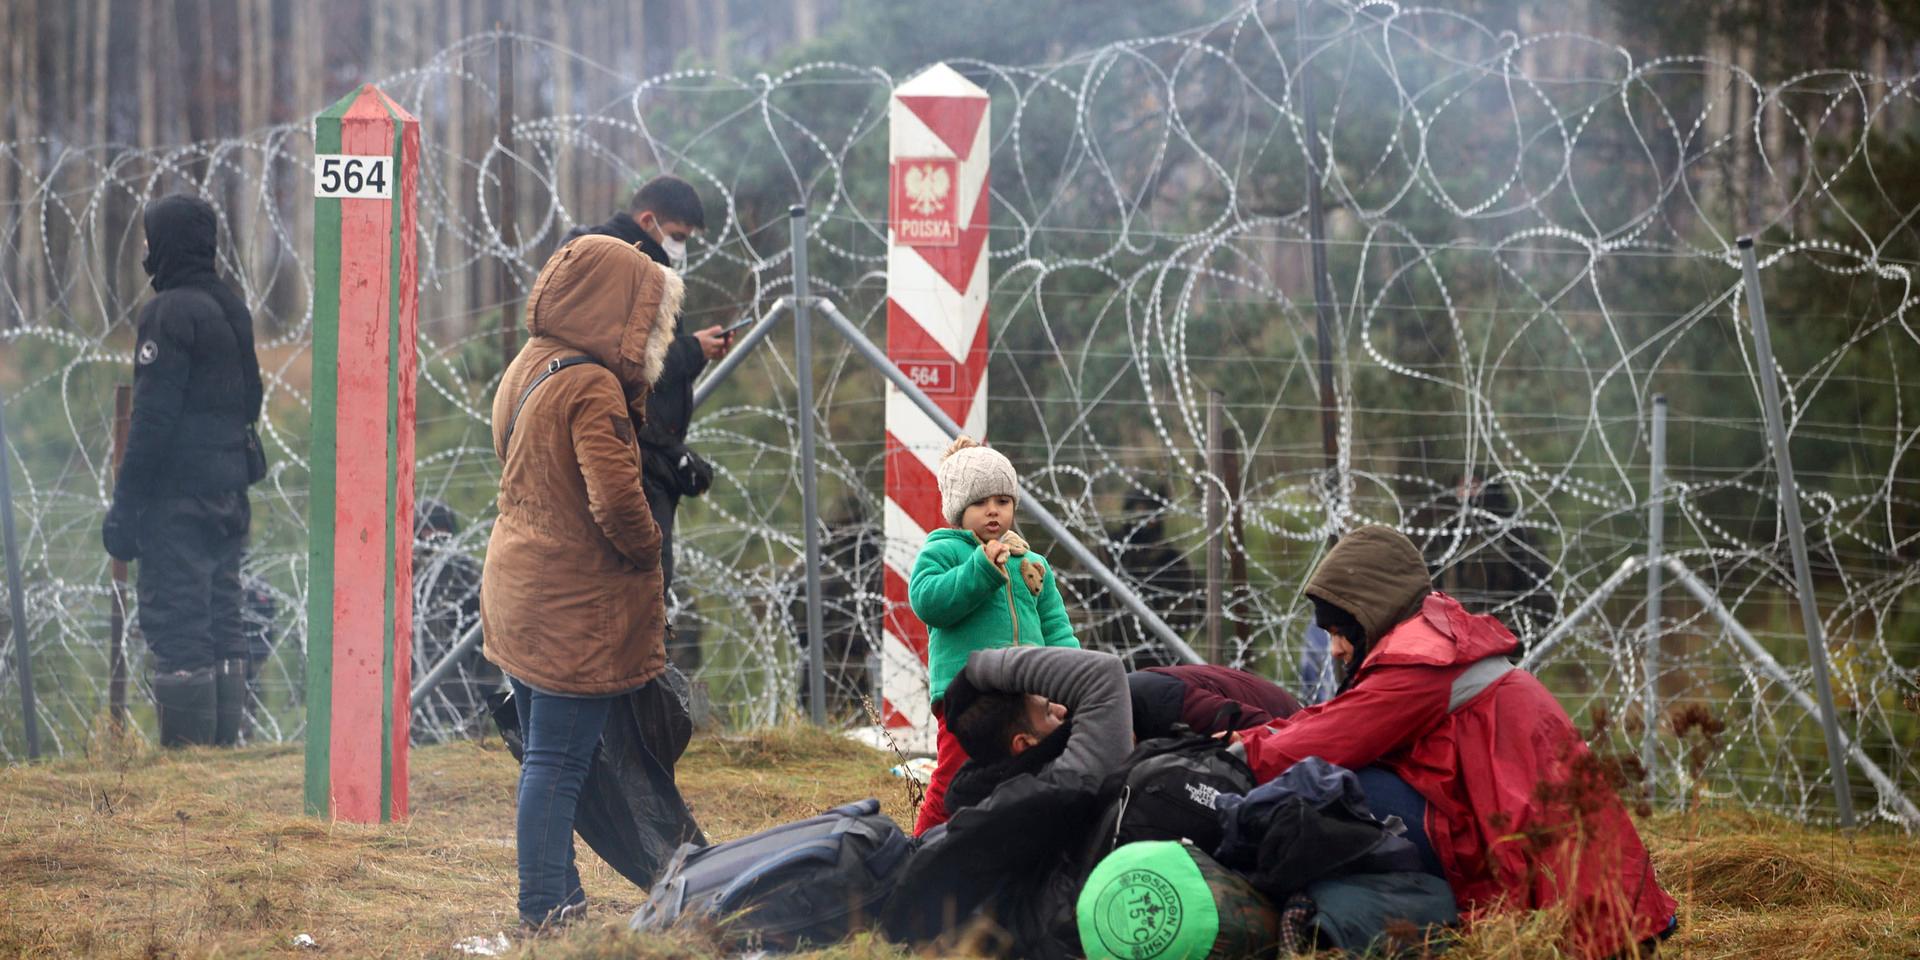 Migrants from the Middle East and elsewhere rest as they gather at the Belarus-Poland border near Grodno, Belarus, Monday, Nov. 8, 2021. Poland increased security at its border with Belarus, on the European Union's eastern border, after a large group of migrants in Belarus appeared to be congregating at a crossing point, officials said Monday. The development appeared to signal an escalation of a crisis that has being going on for months in which the autocratic regime of Belarus has encouraged migrants from the Middle East and elsewhere to illegally enter the European Union, at first through Lithuania and Latvia and now primarily through Poland. (Leonid Shcheglov/BelTA via AP)